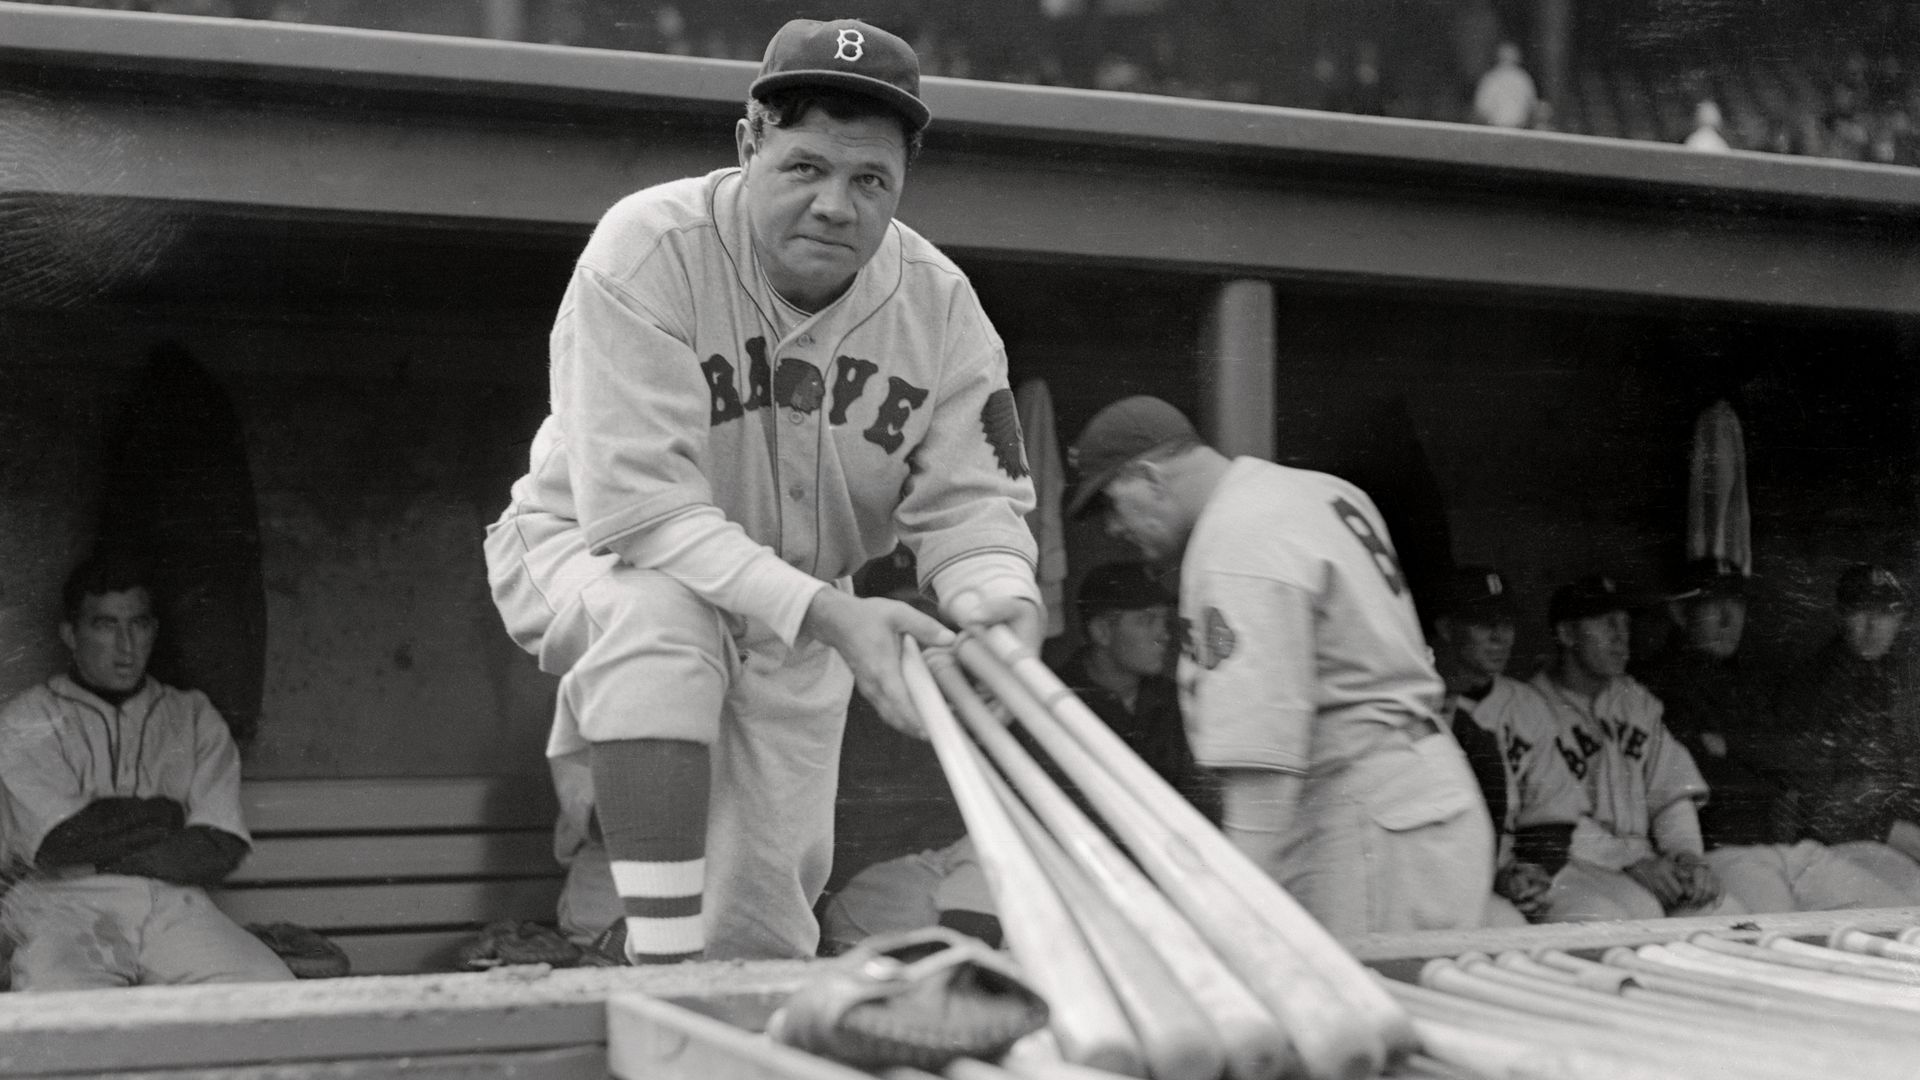 babe ruth with the boston braves